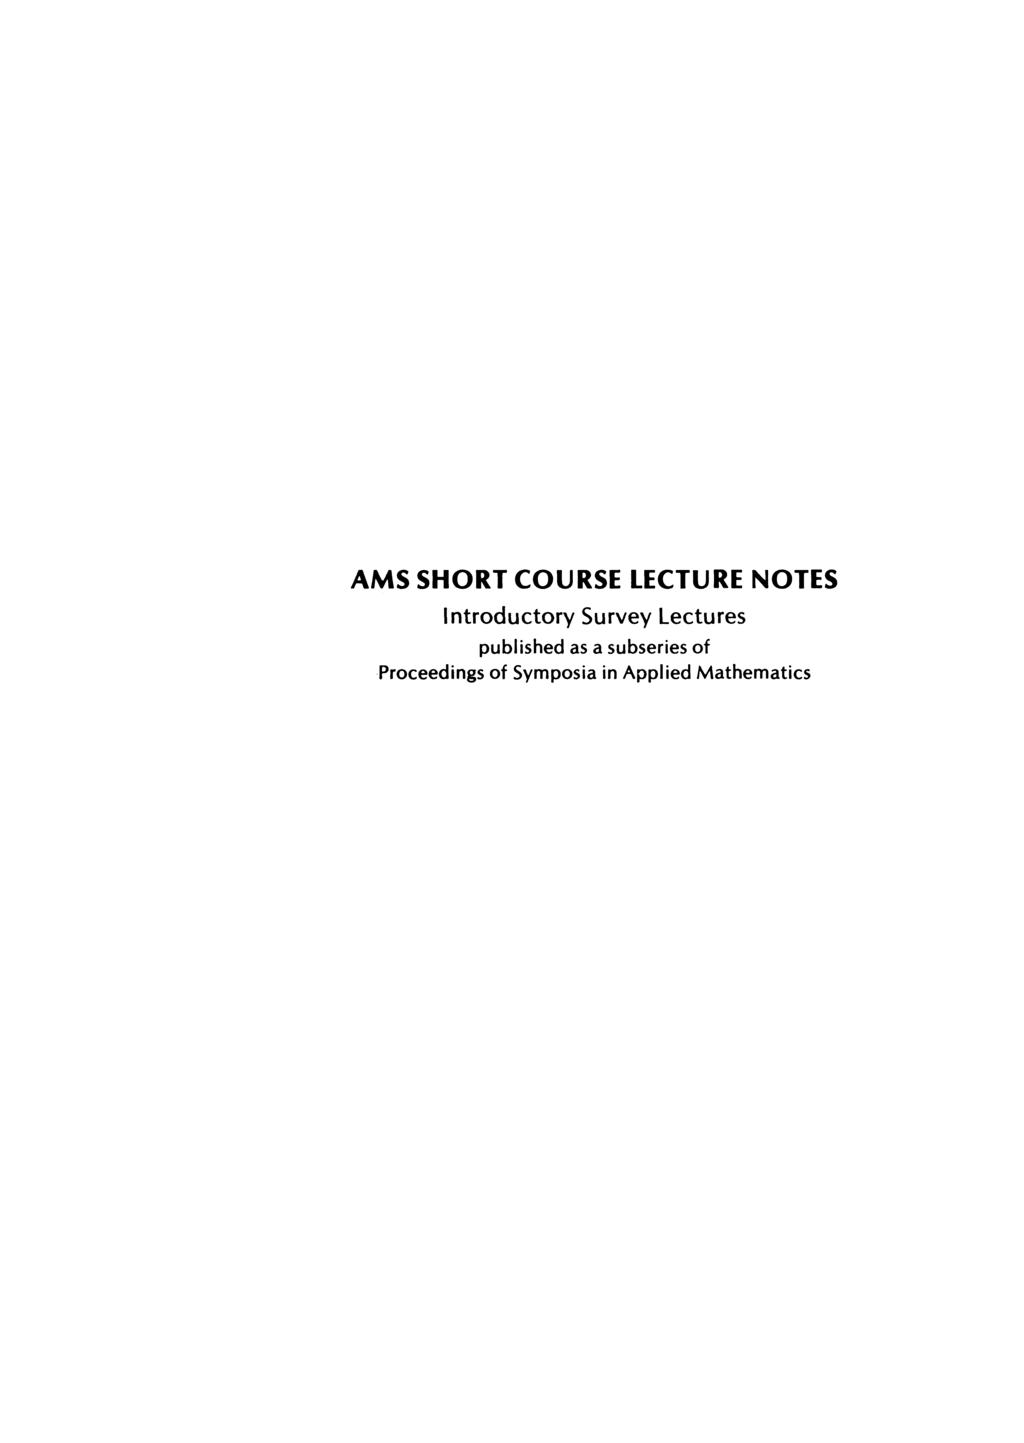 AMS SHORT COURSE LECTURE NOTES Introductory Survey Lectures